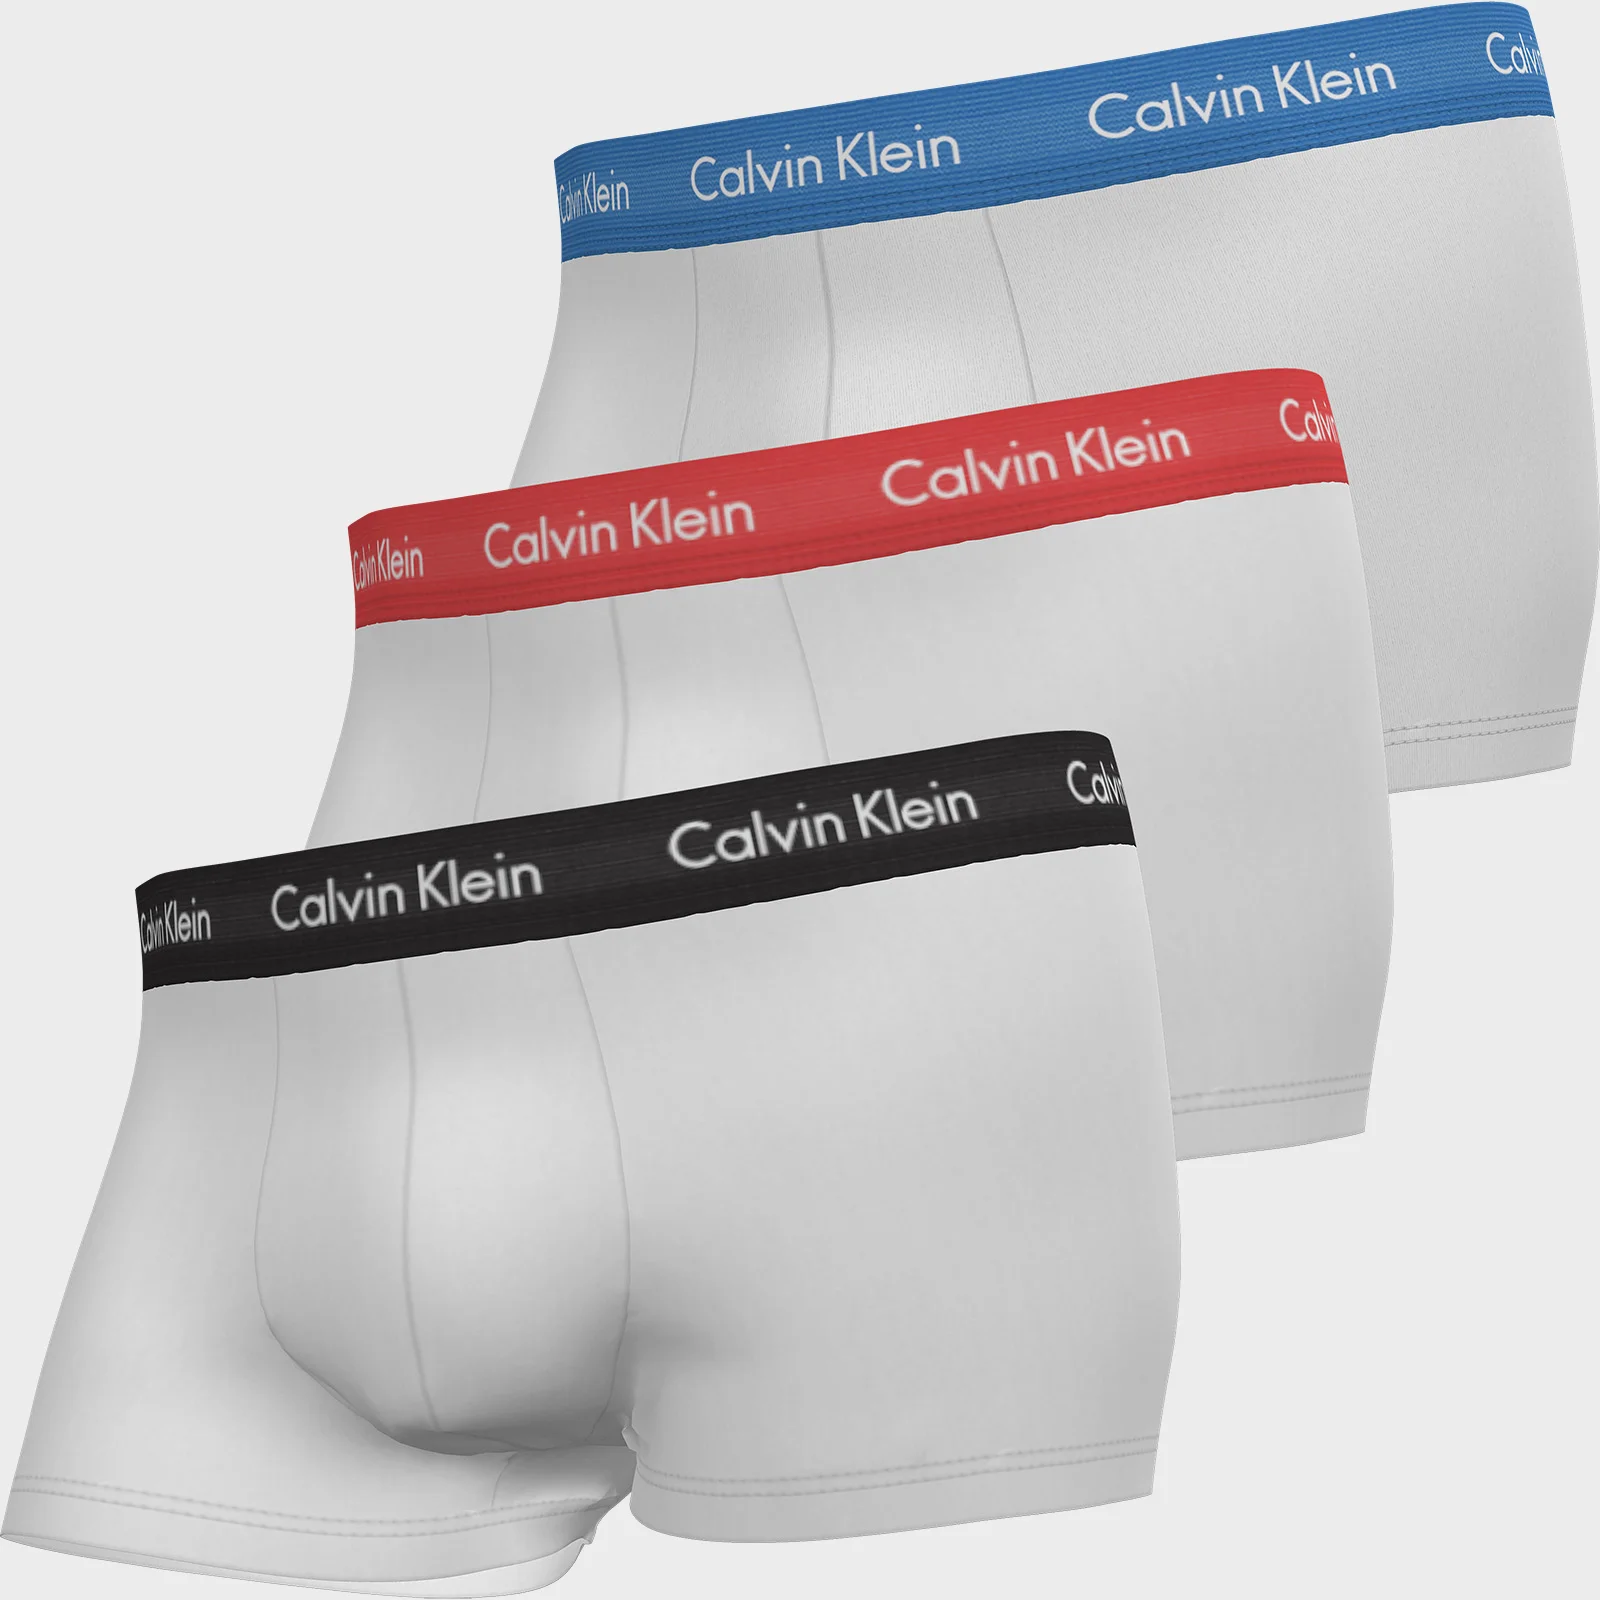 Calvin Klein Men's Cotton Stretch Low Rise 3 Pack Trunks with Contrast Waistband - Blue/Strawberry Field/Black Image 1